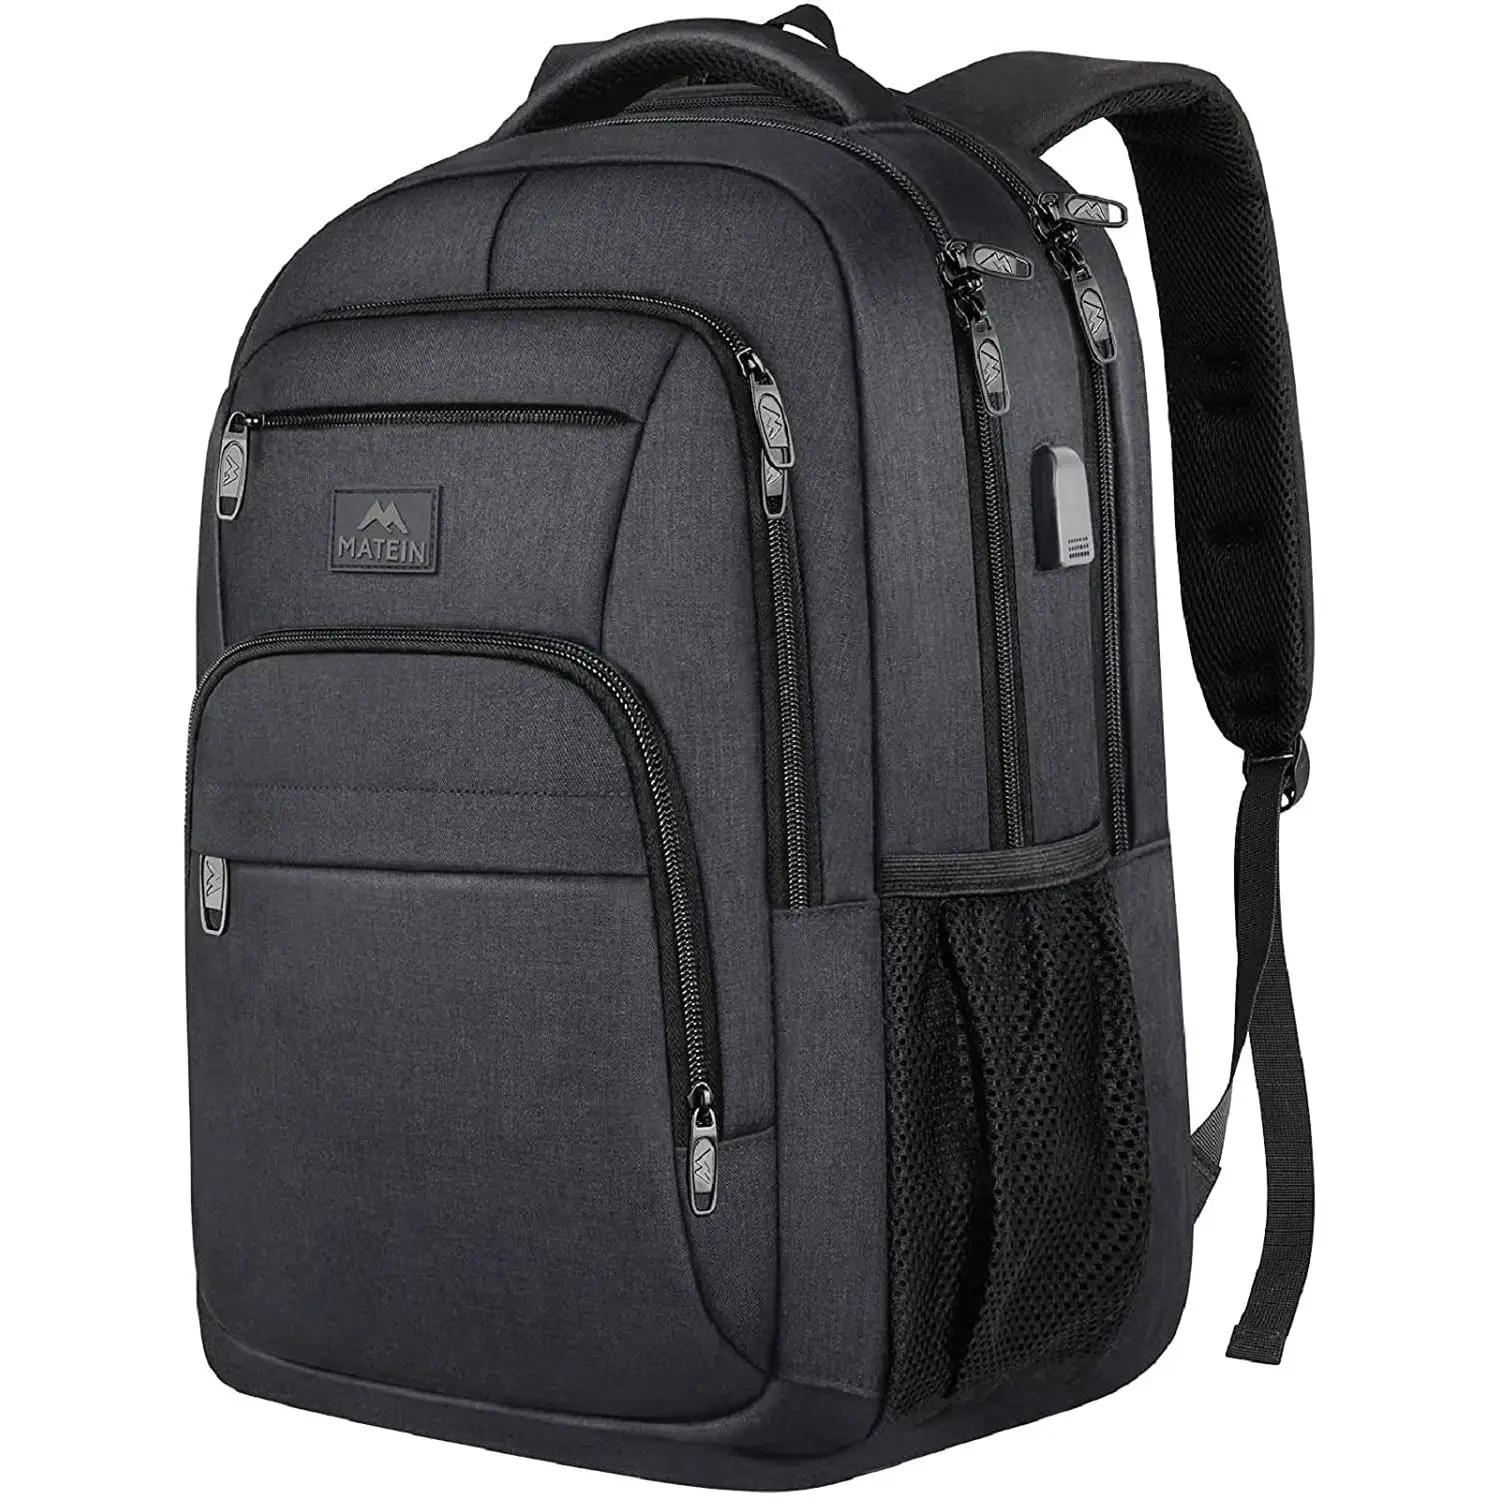 15.6inch Multifunctional Anti-theft Student Travel Bag Luggage Durable USB Port Business Computer Laptop Backpack School Bags